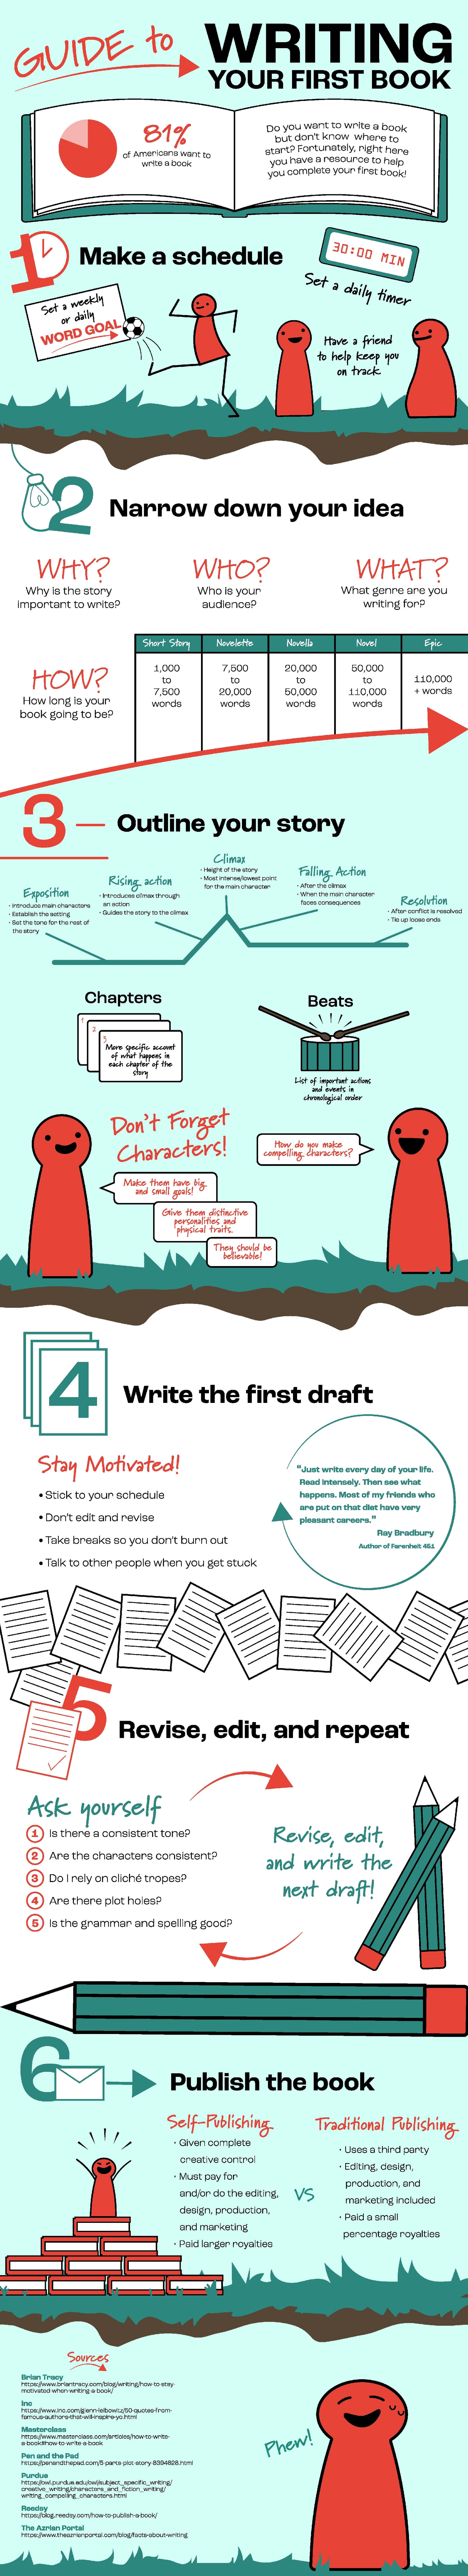 Final version of Bookwriting infographic